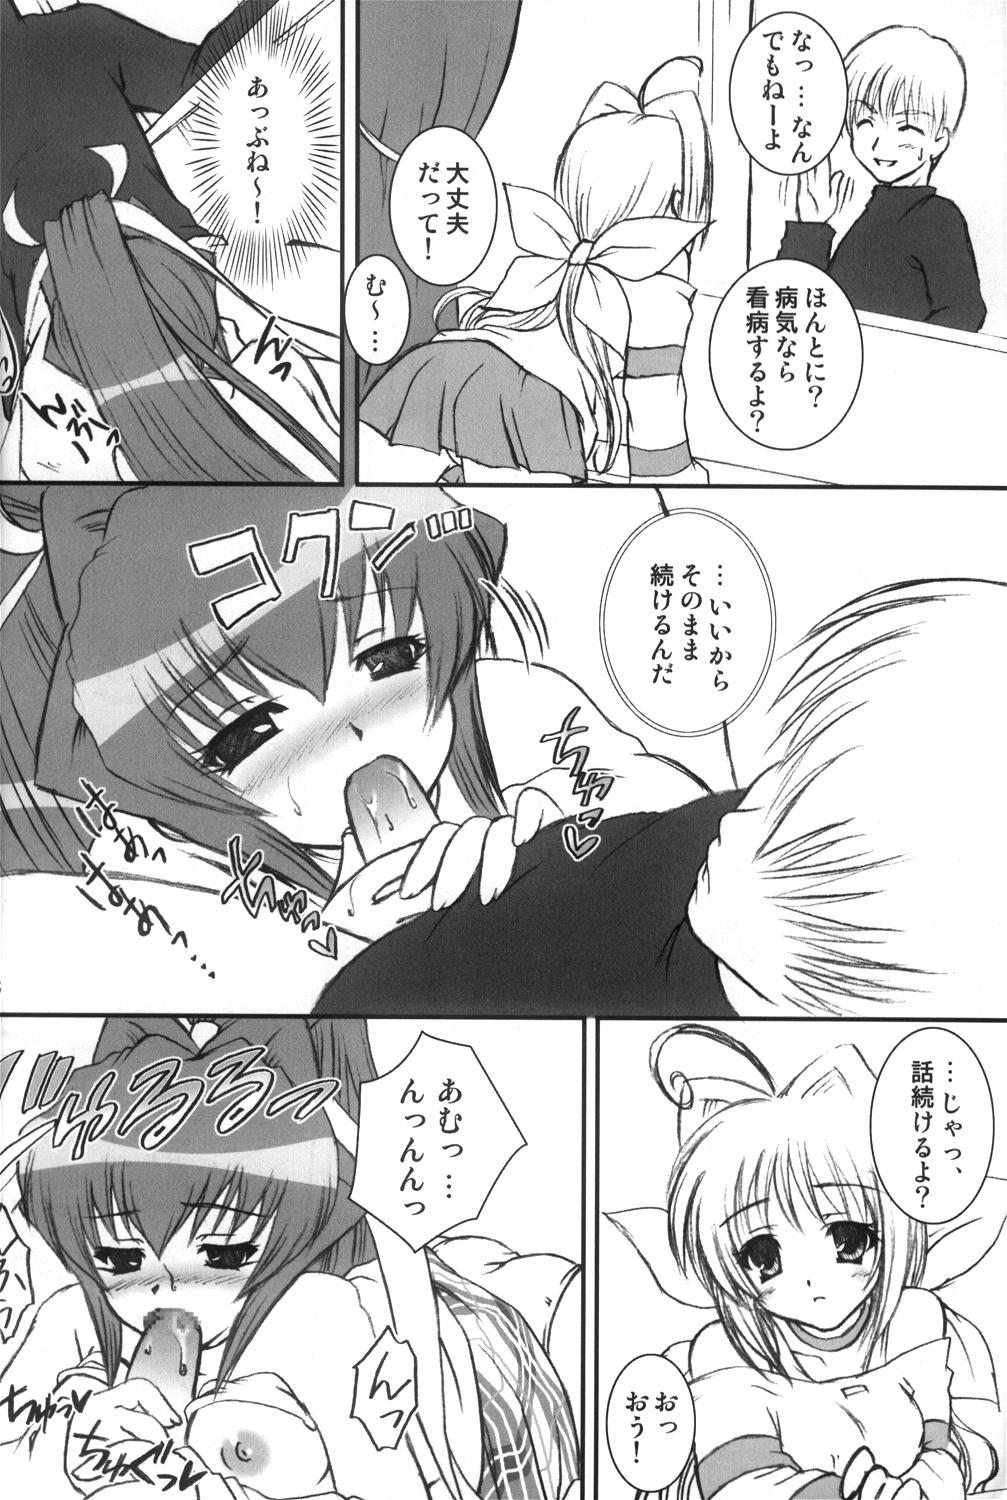 Mmf I have fallen in love with you... - Muv luv Camshow - Page 7